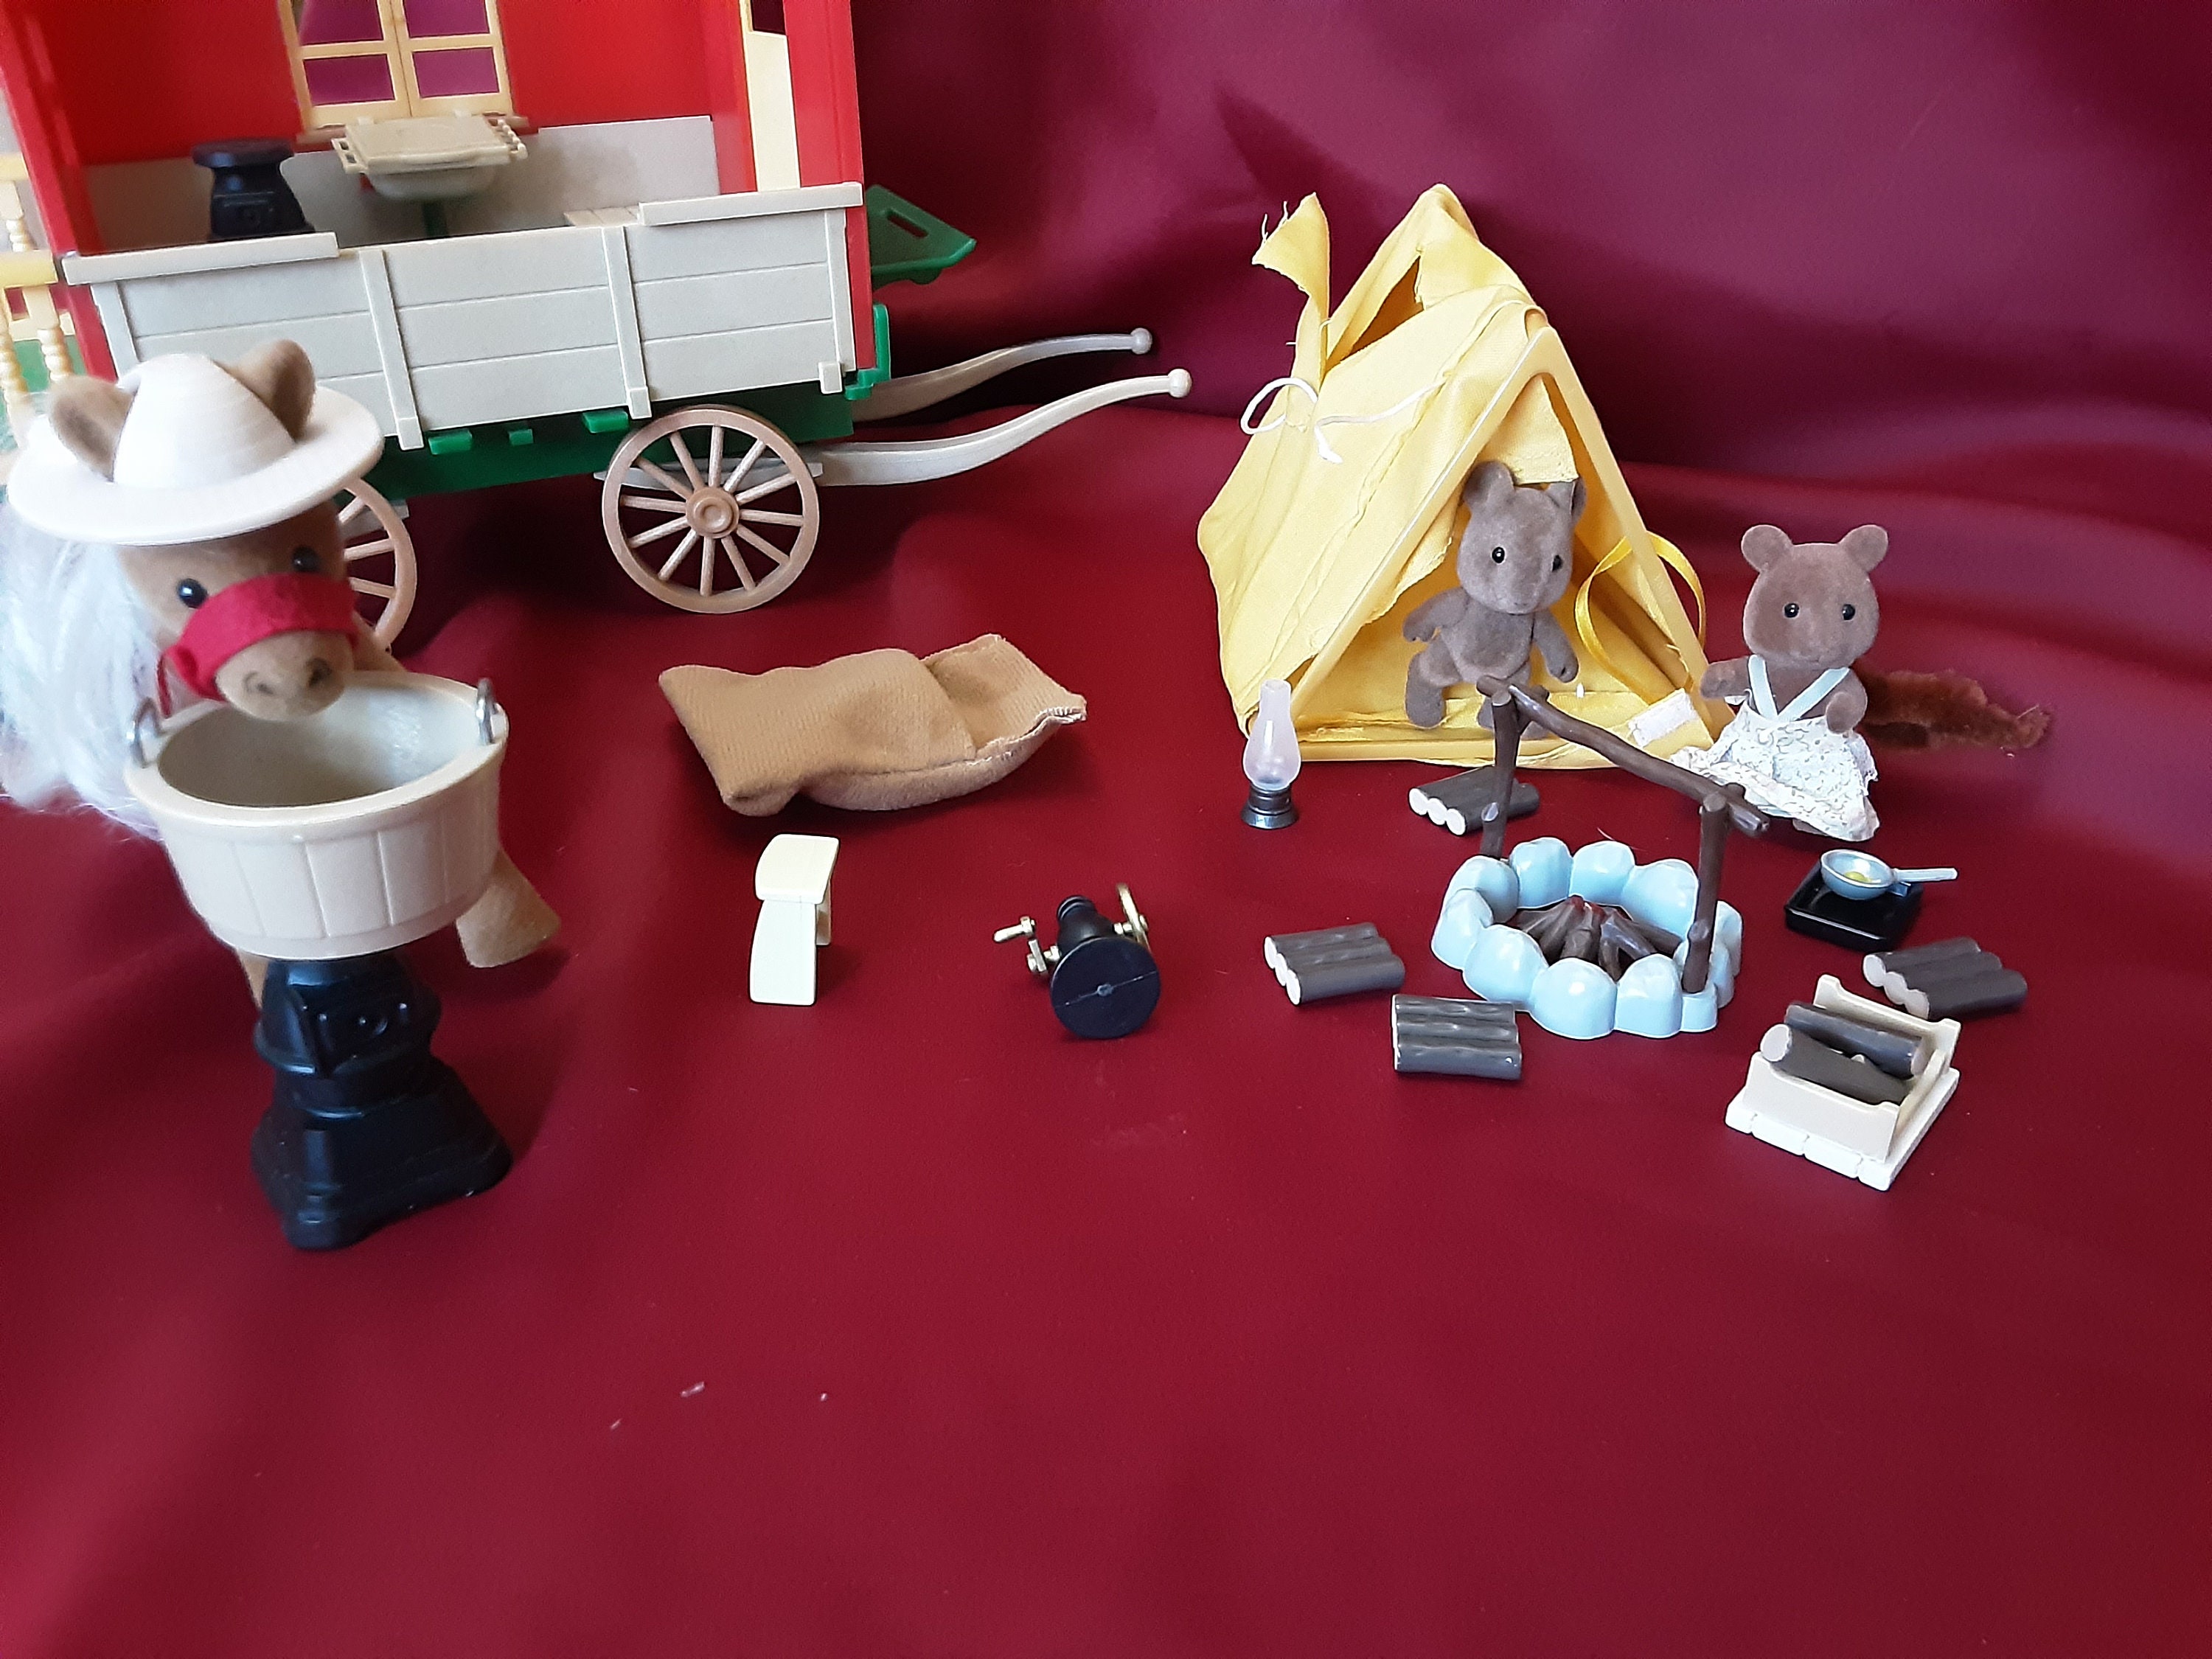 The Rarest Sylvanian Families Figurines and Sets Of All-Time